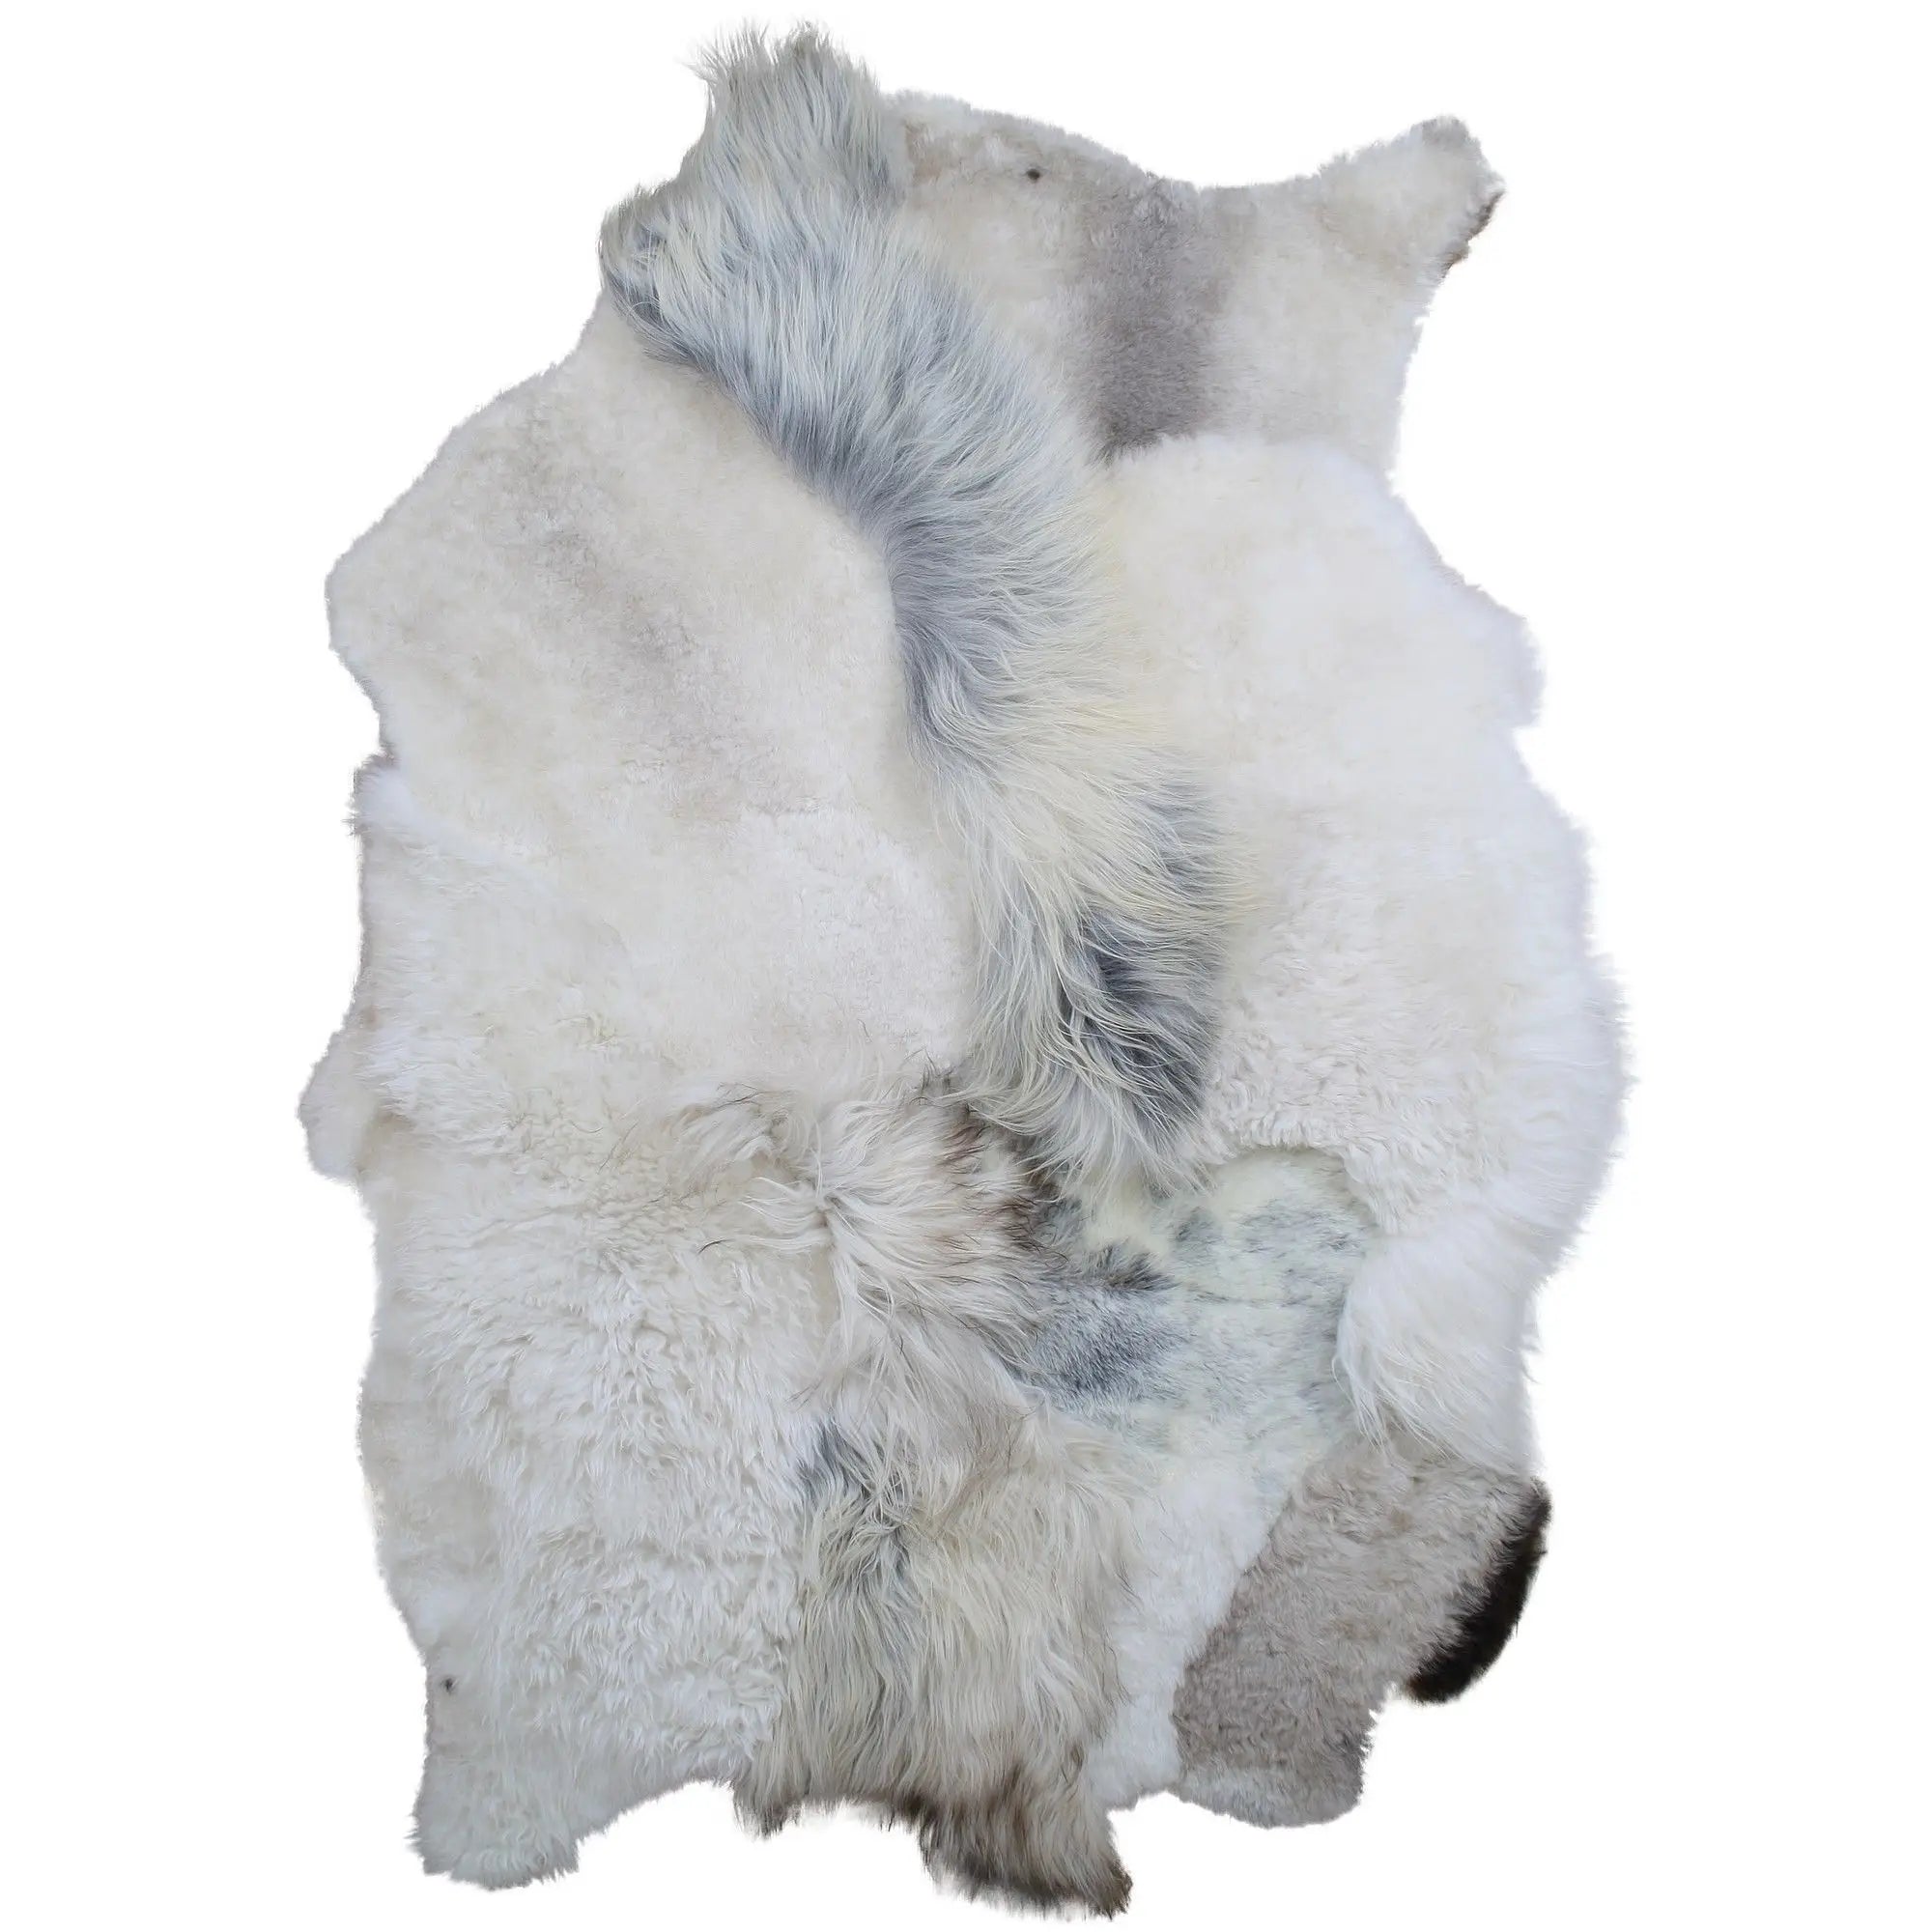 Sheepskins are used for benches, chairs, floor, and sofa decoration, adding warm texture to room de.  Amethyst Home provides interior design services, furniture, rugs, and lighting in the Kansas City metro area.